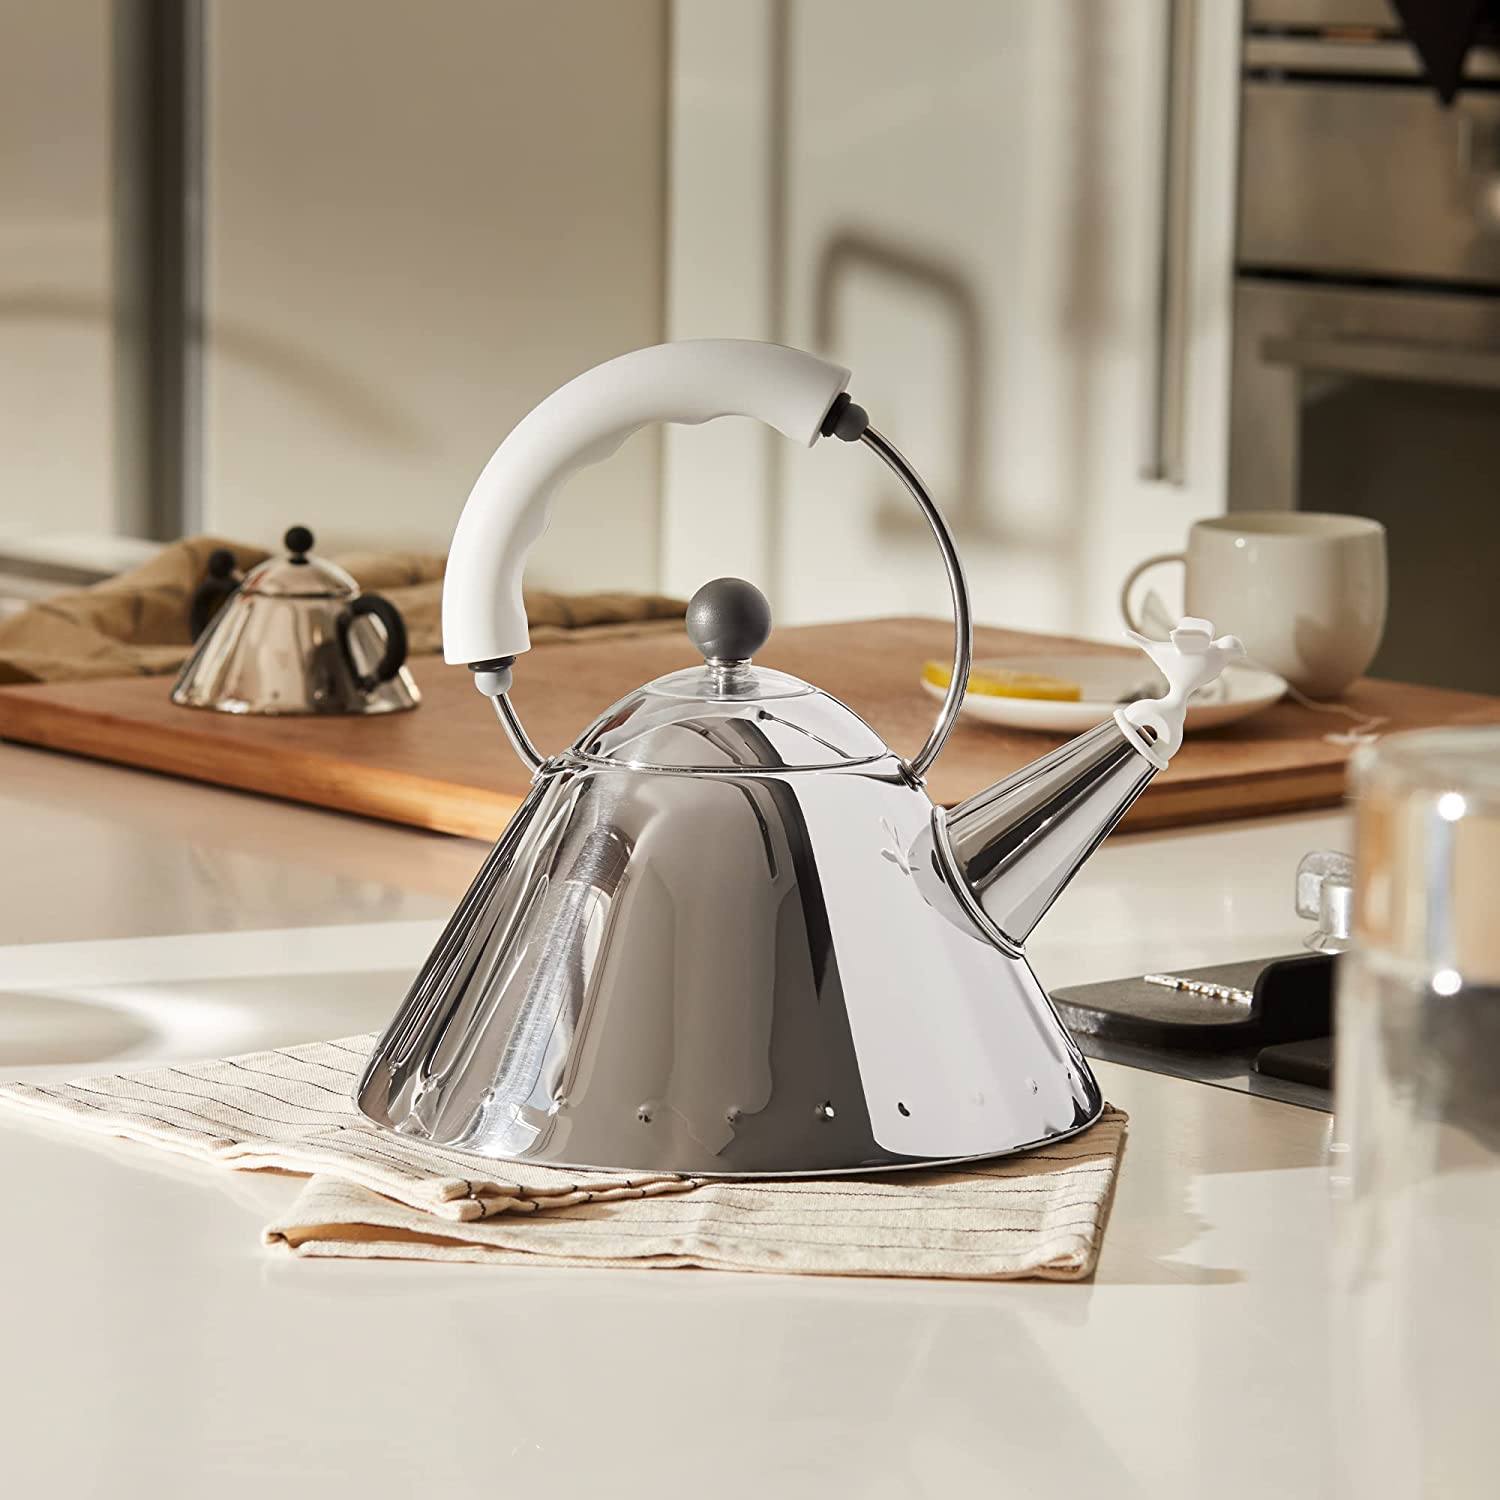 Alessi 9093 Kettle - Michael Graves